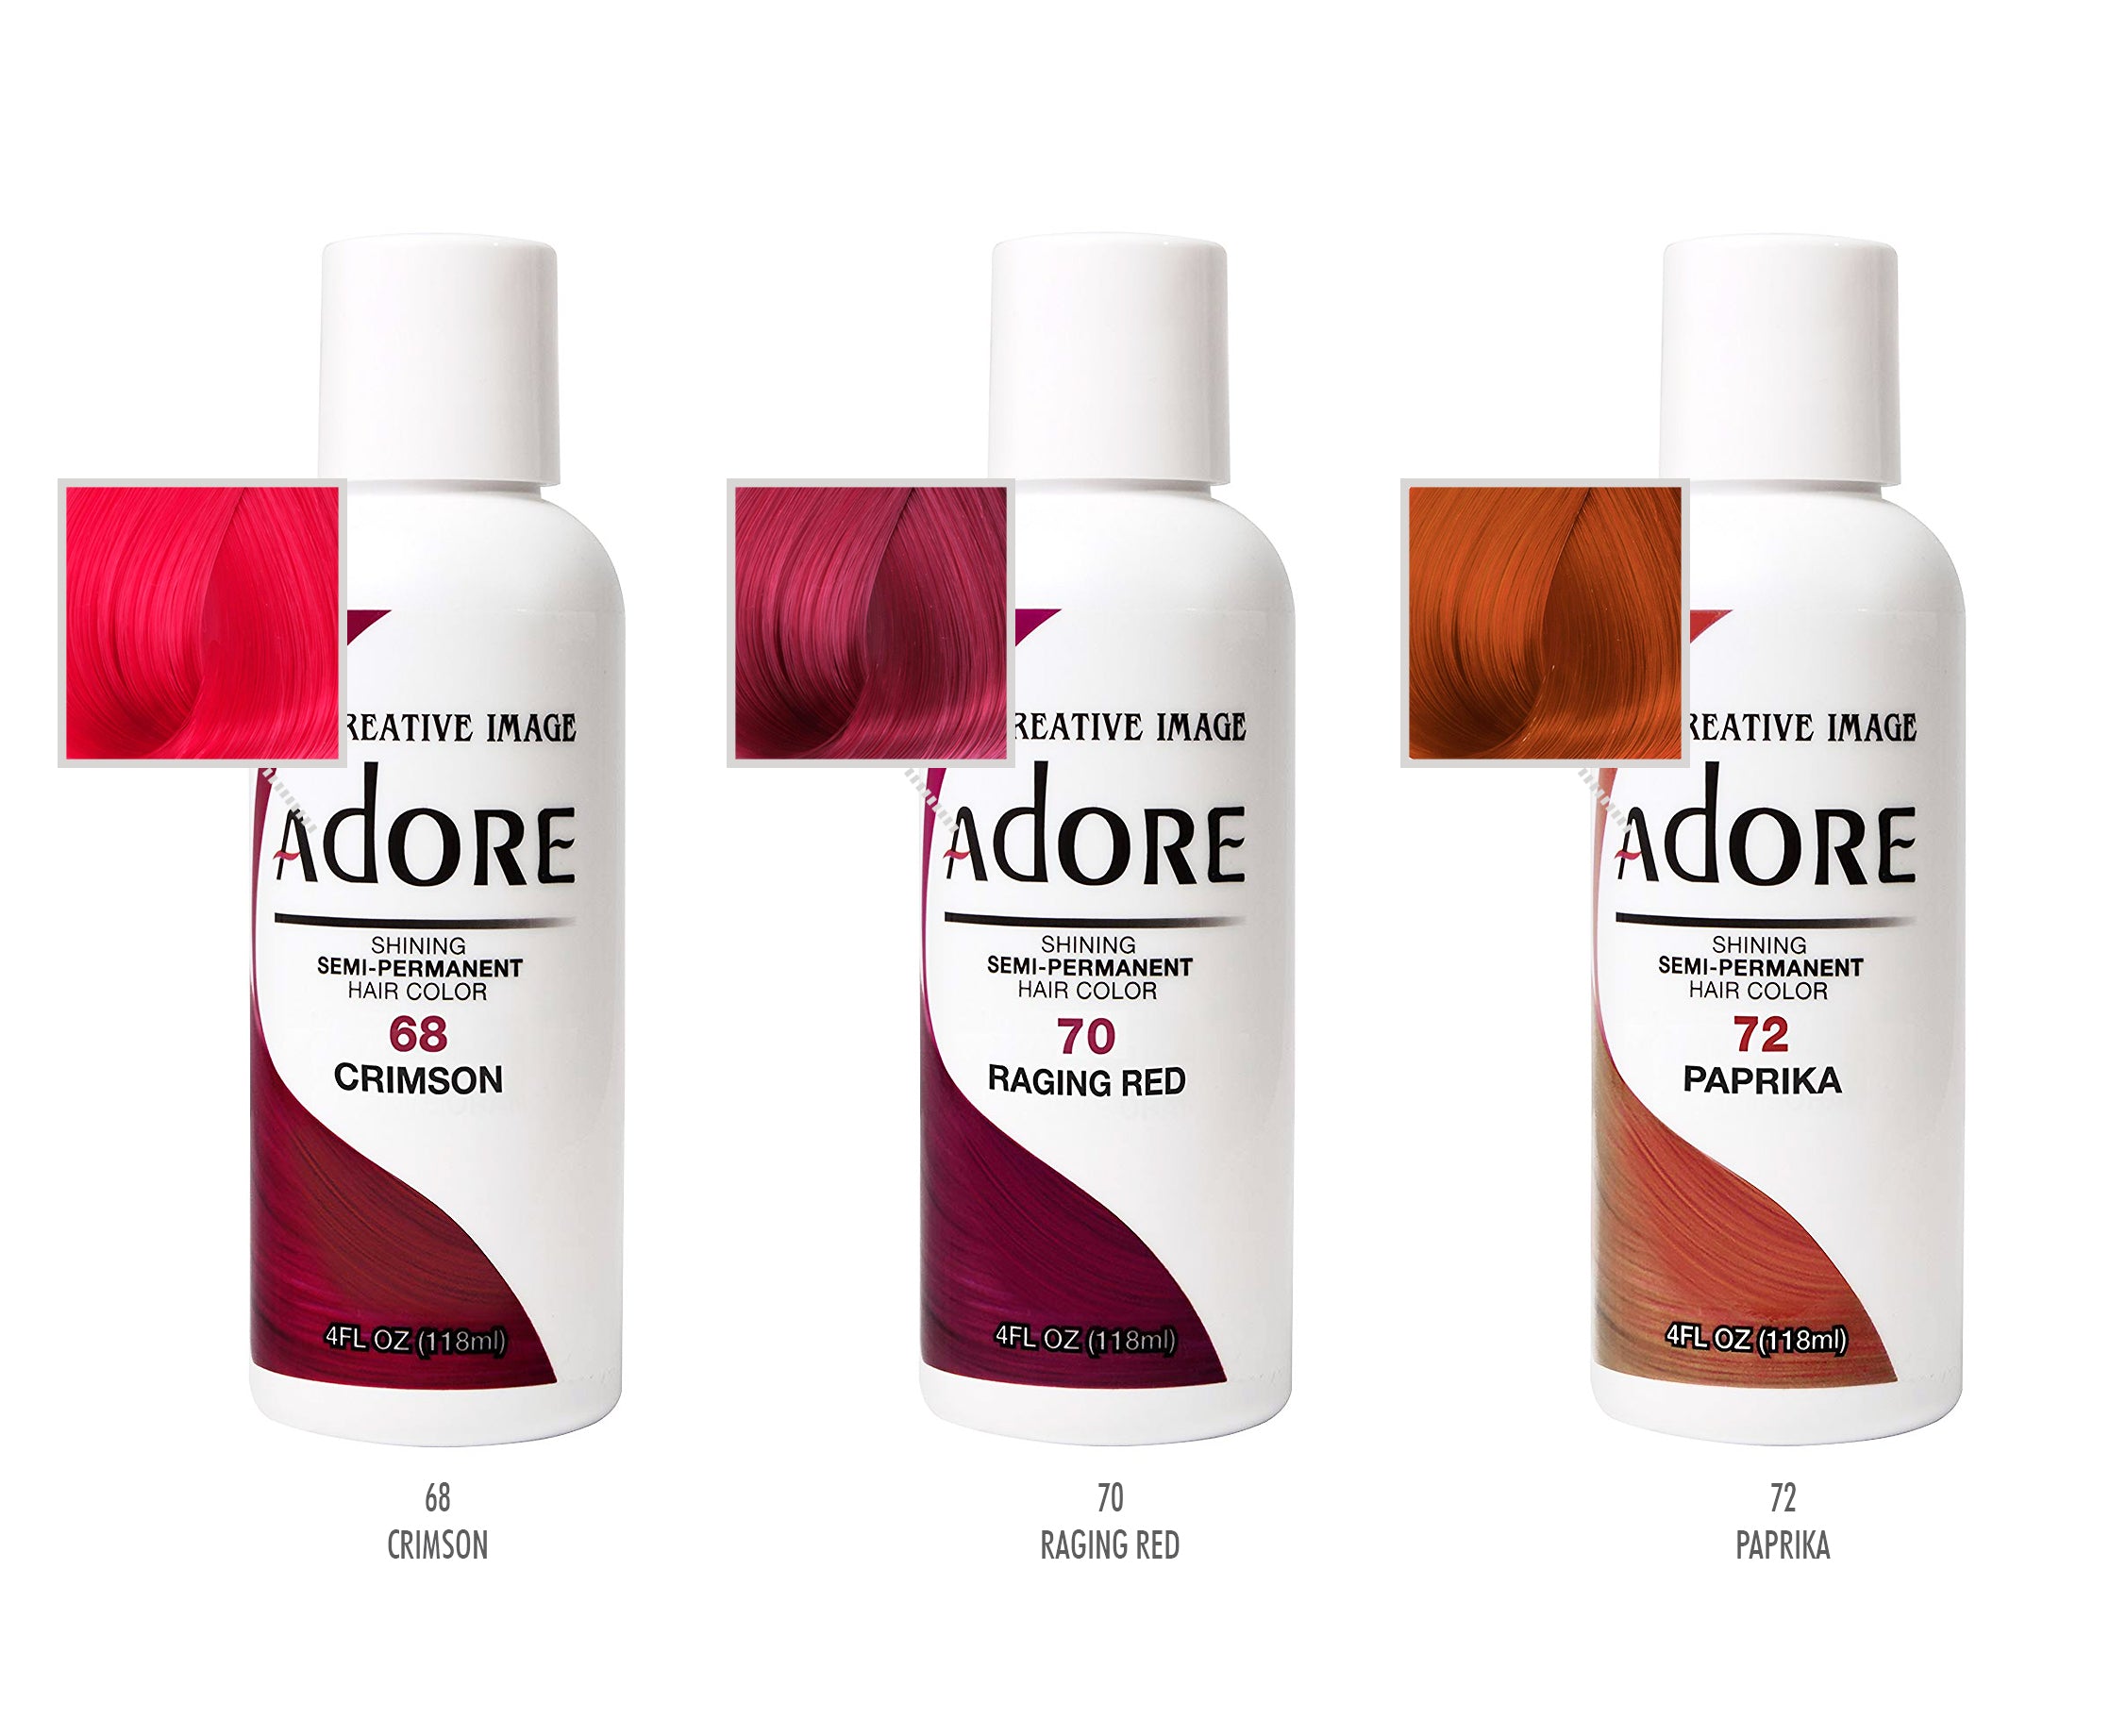 ADORE SHINING SEMIPERMANENT HAIR COLOR 42 COLORS BSW BEAUTY CANADA